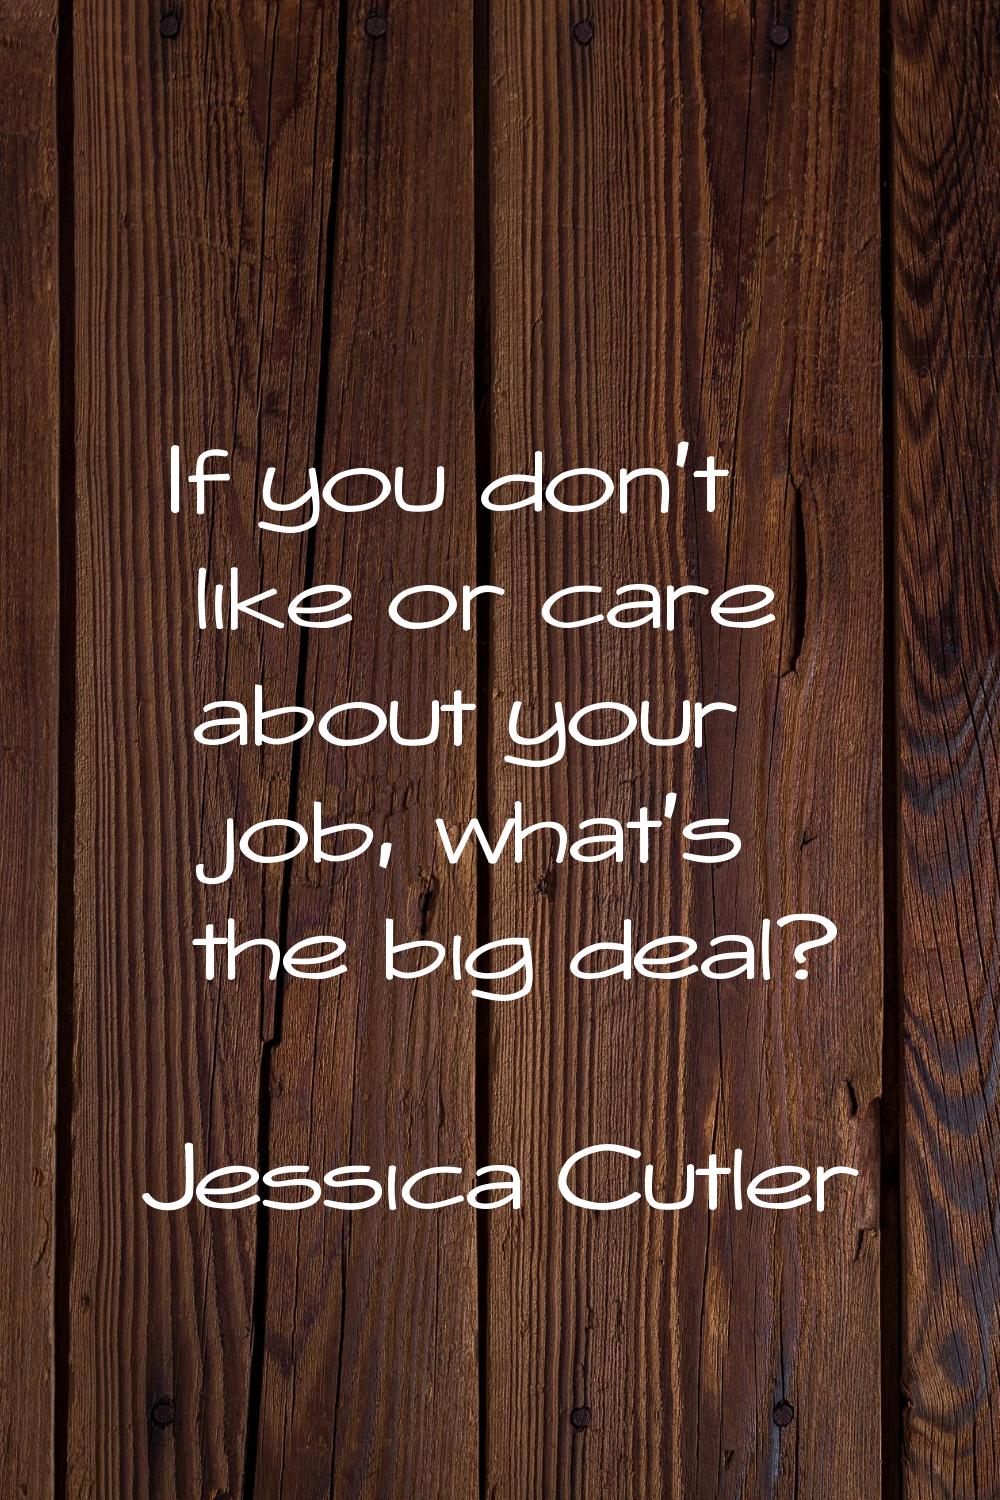 If you don't like or care about your job, what's the big deal?